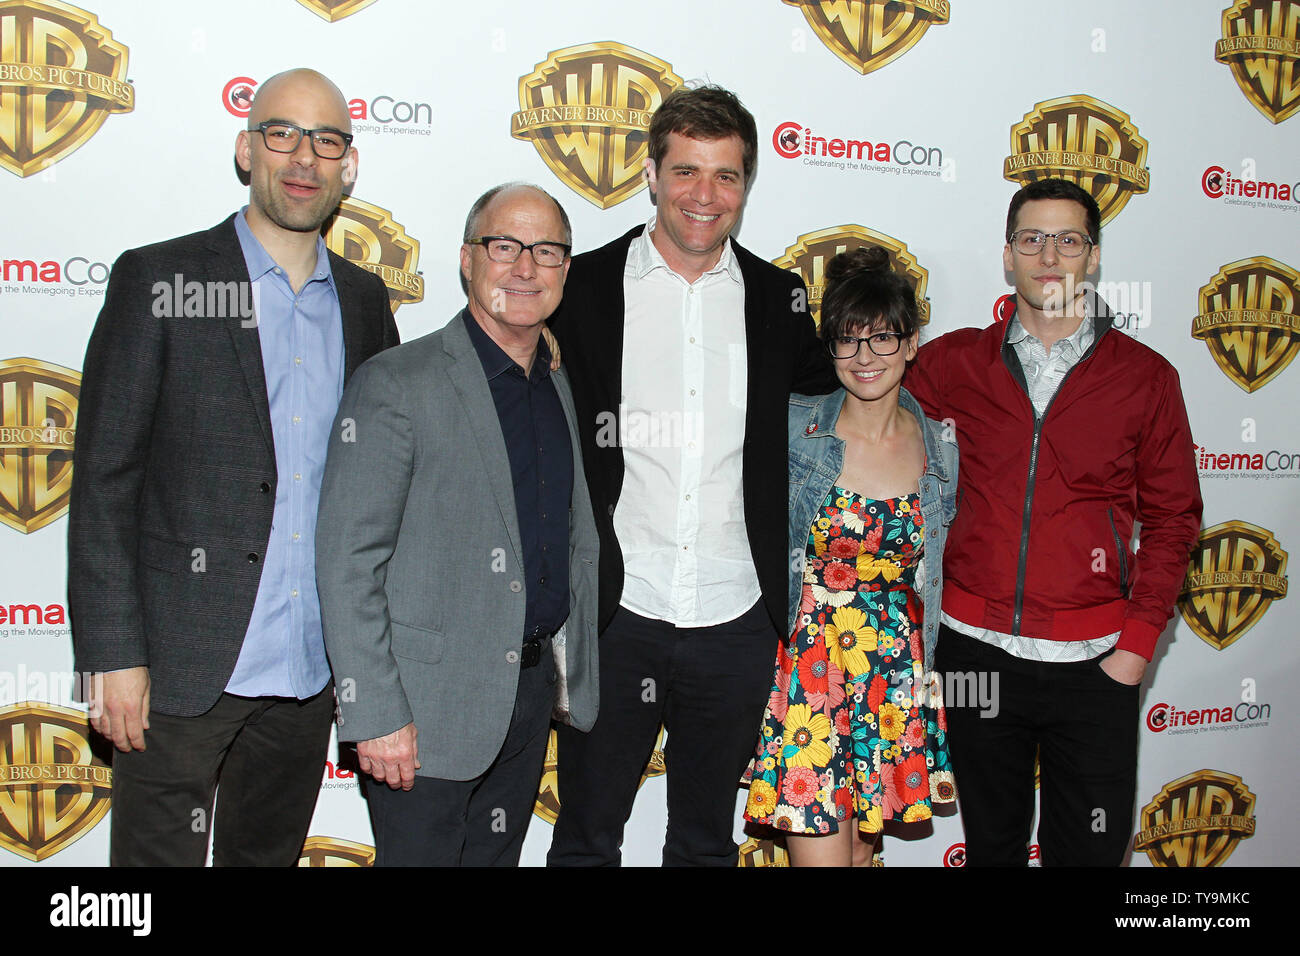 Doug Sweetland, Brad Lewis, Nicholas Stoller, Katie Crown and Andy Sandberg arrive for the Warner Bros. Pictures Presentation at CinemaCon 2016, The Colosseum at Caesars Palace, Las Vegas, Nevada on April 12, 2016. Photo by James Atoa/UPI Stock Photo